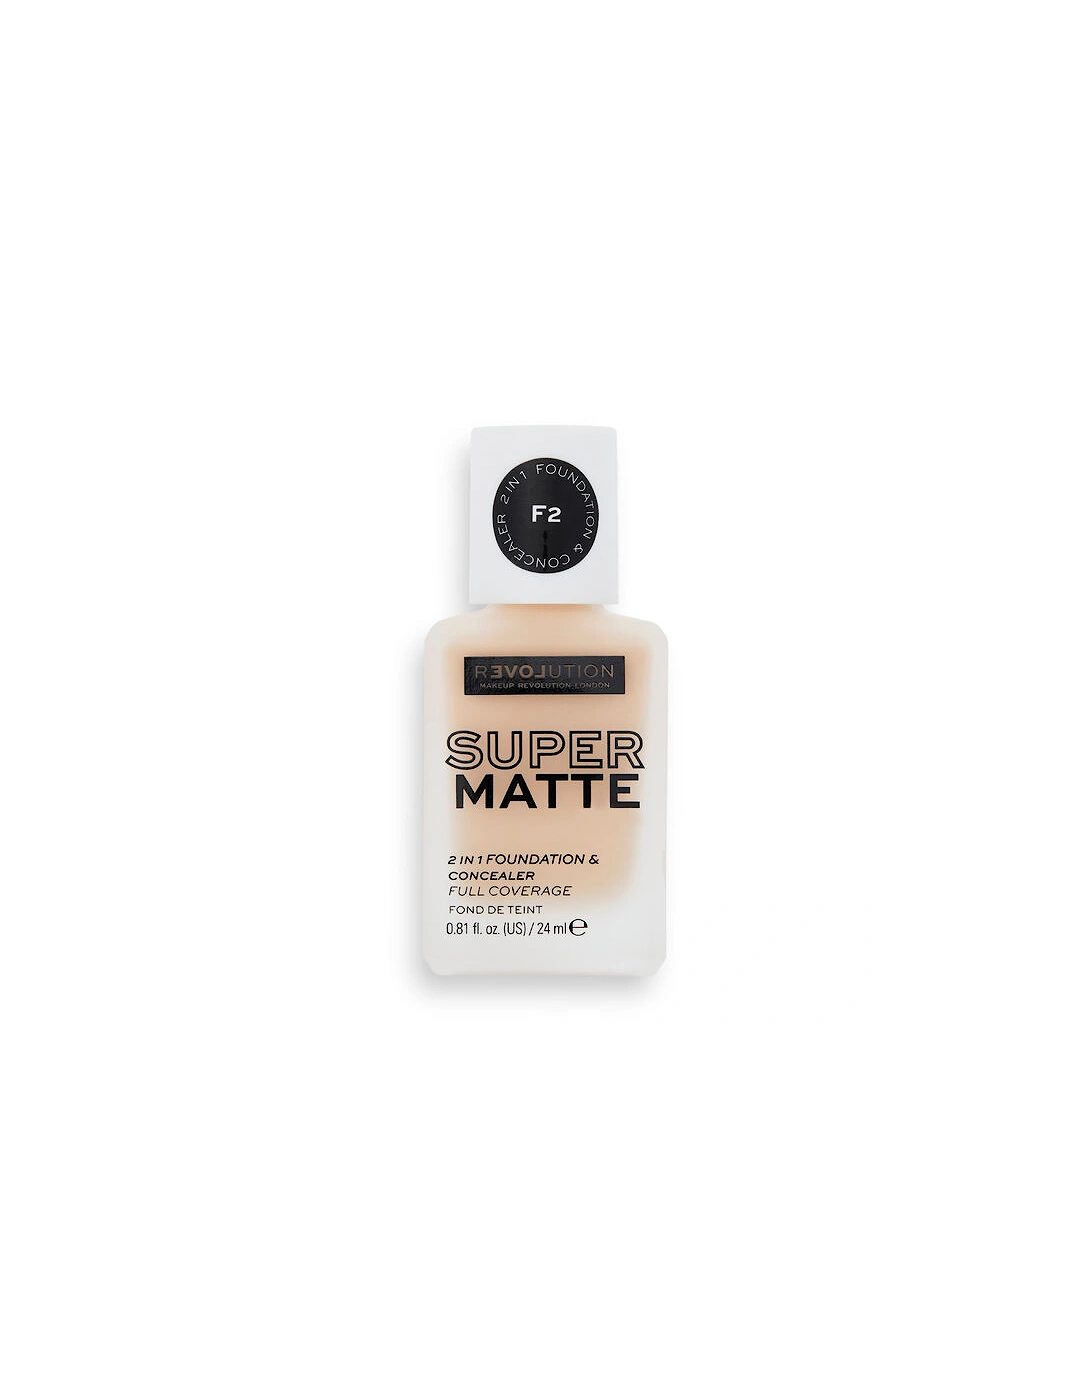 Relove by Supermatte Foundation F2, 2 of 1